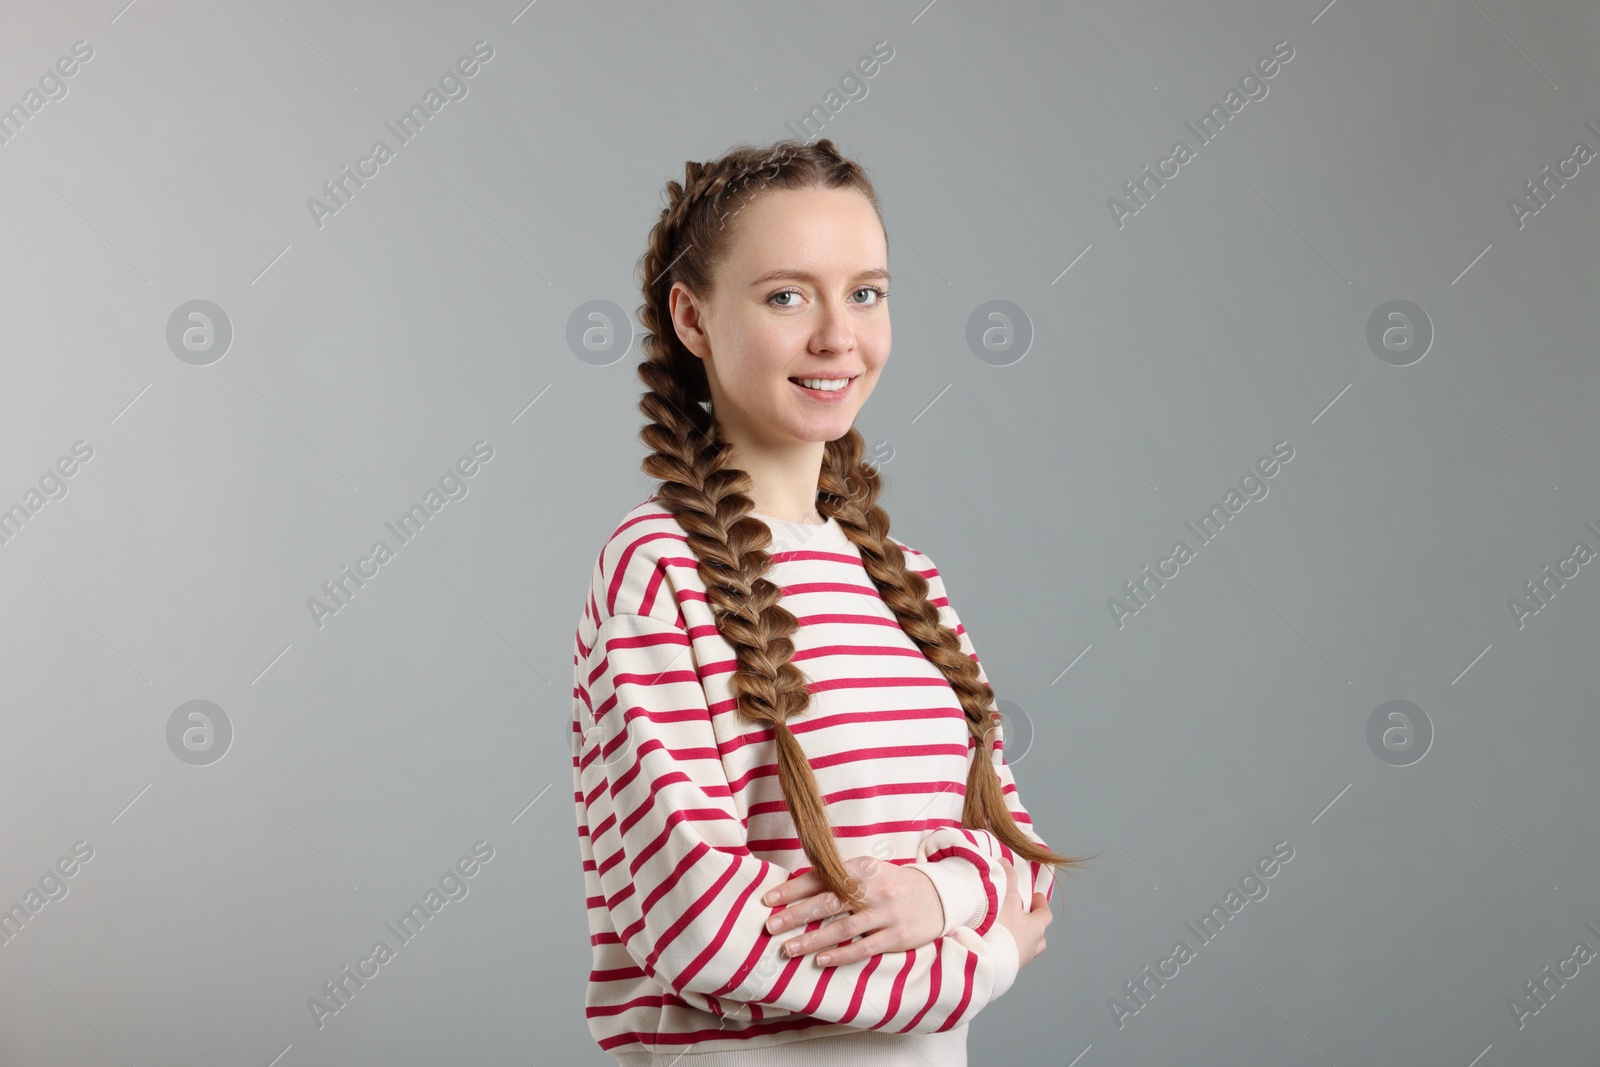 Photo of Woman with braided hair on grey background